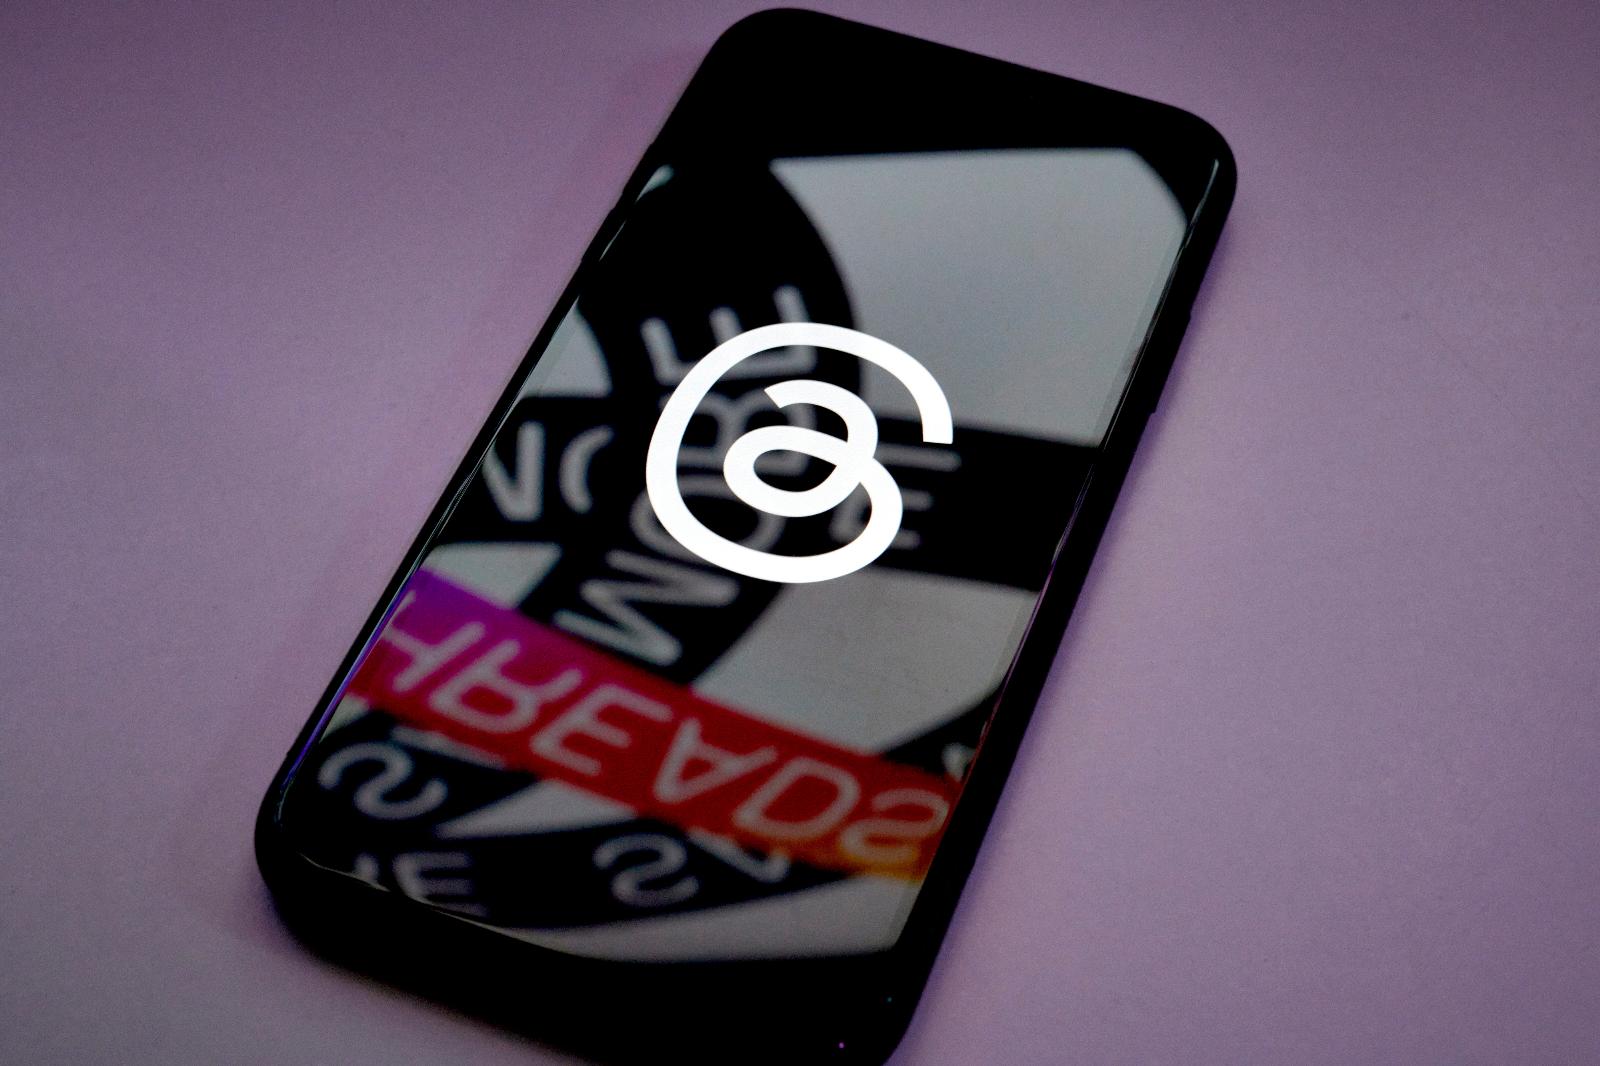 Meta’s Threads app is rolling out a Following feed